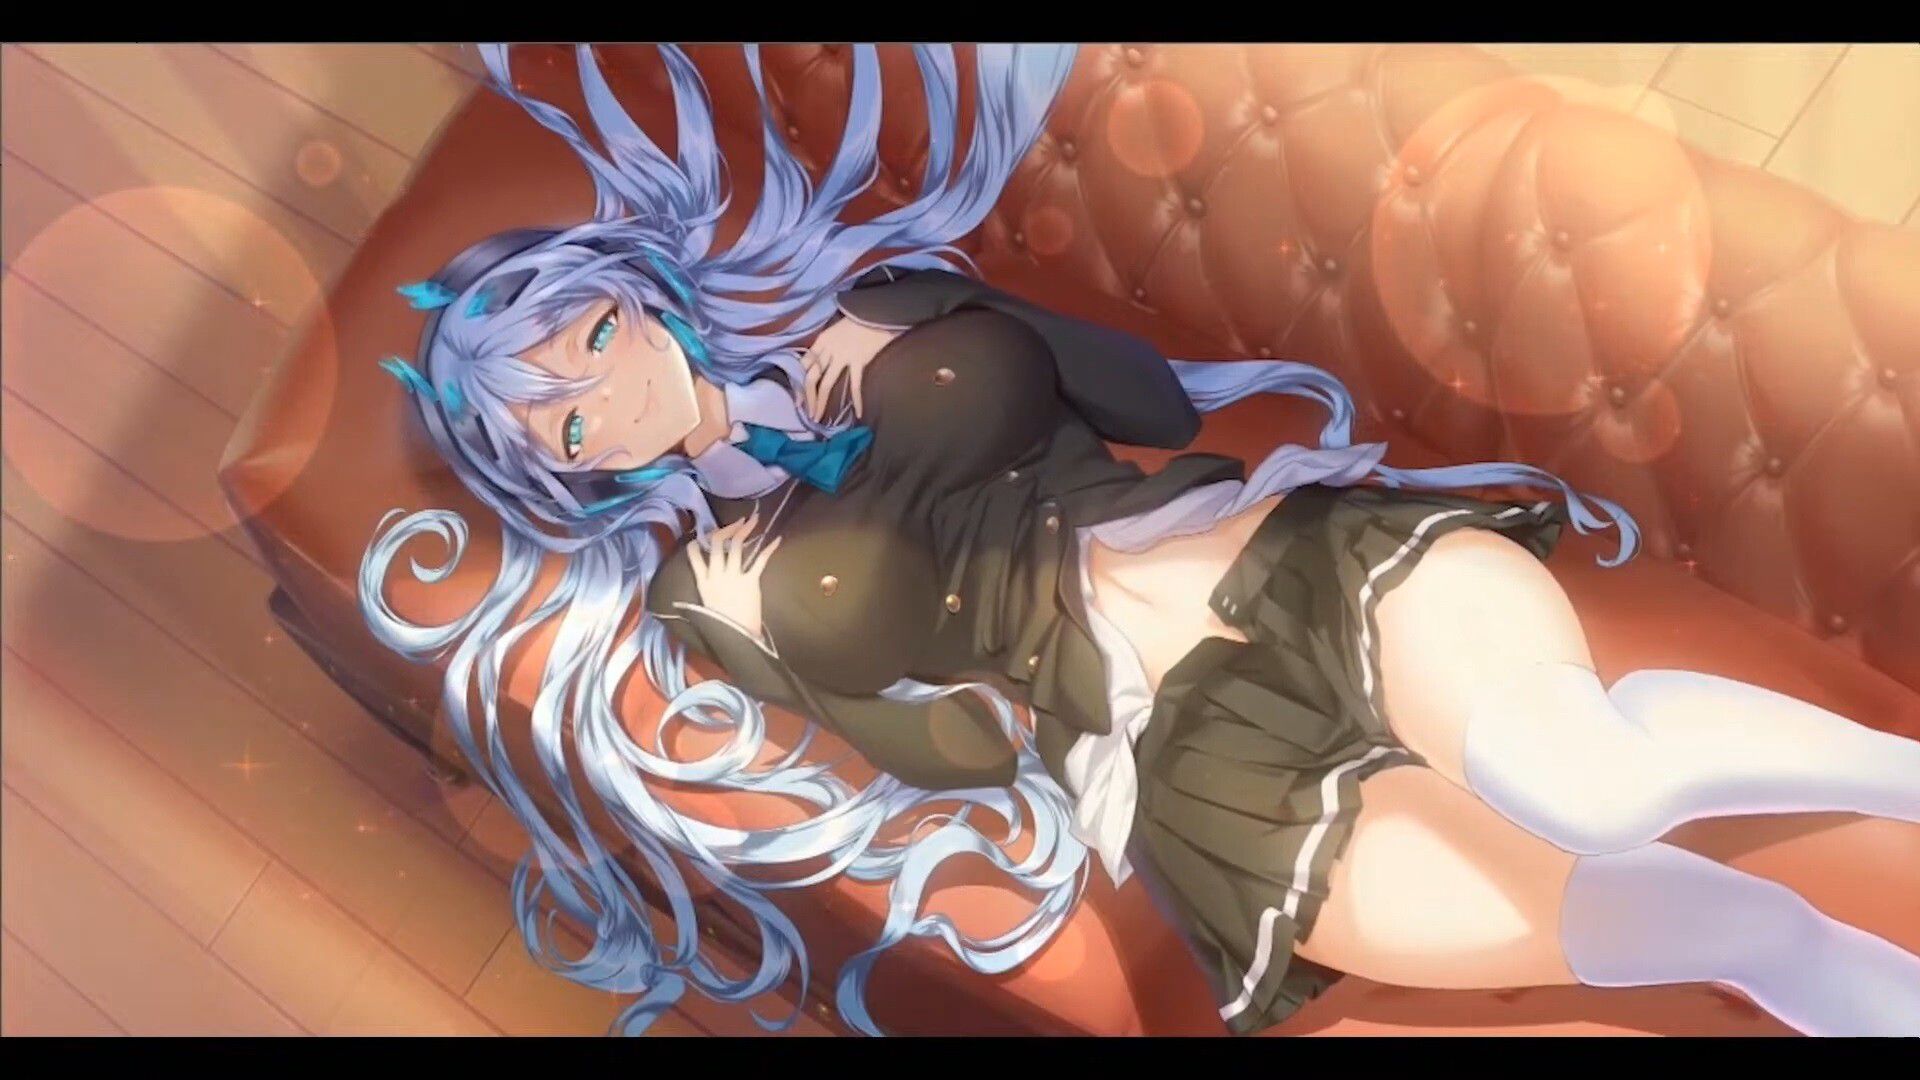 Erotic illustrations of a small girl in the new work "Ange Relink" of "Ange Vierge"! 3